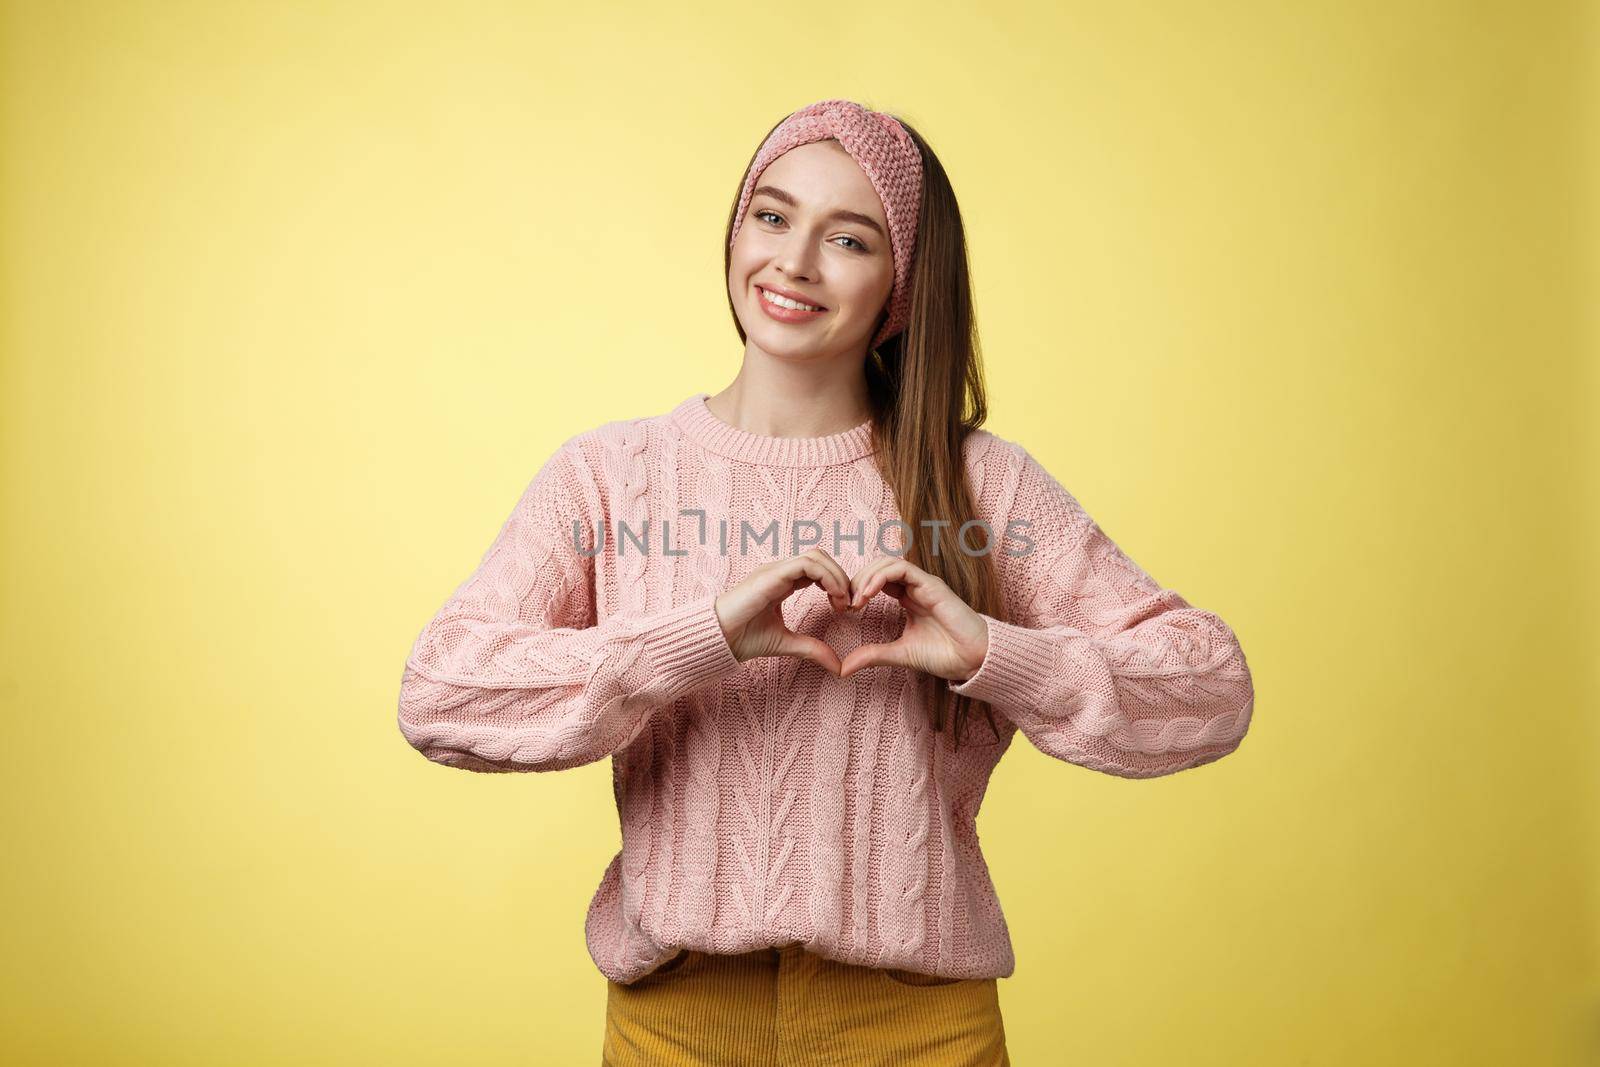 Girl brings peace and love, smiling tender, lovely showing heart gesture over chest, adoring, liking making romantic gestures feeling sympathy, passion and romance in air, posing in sweater.